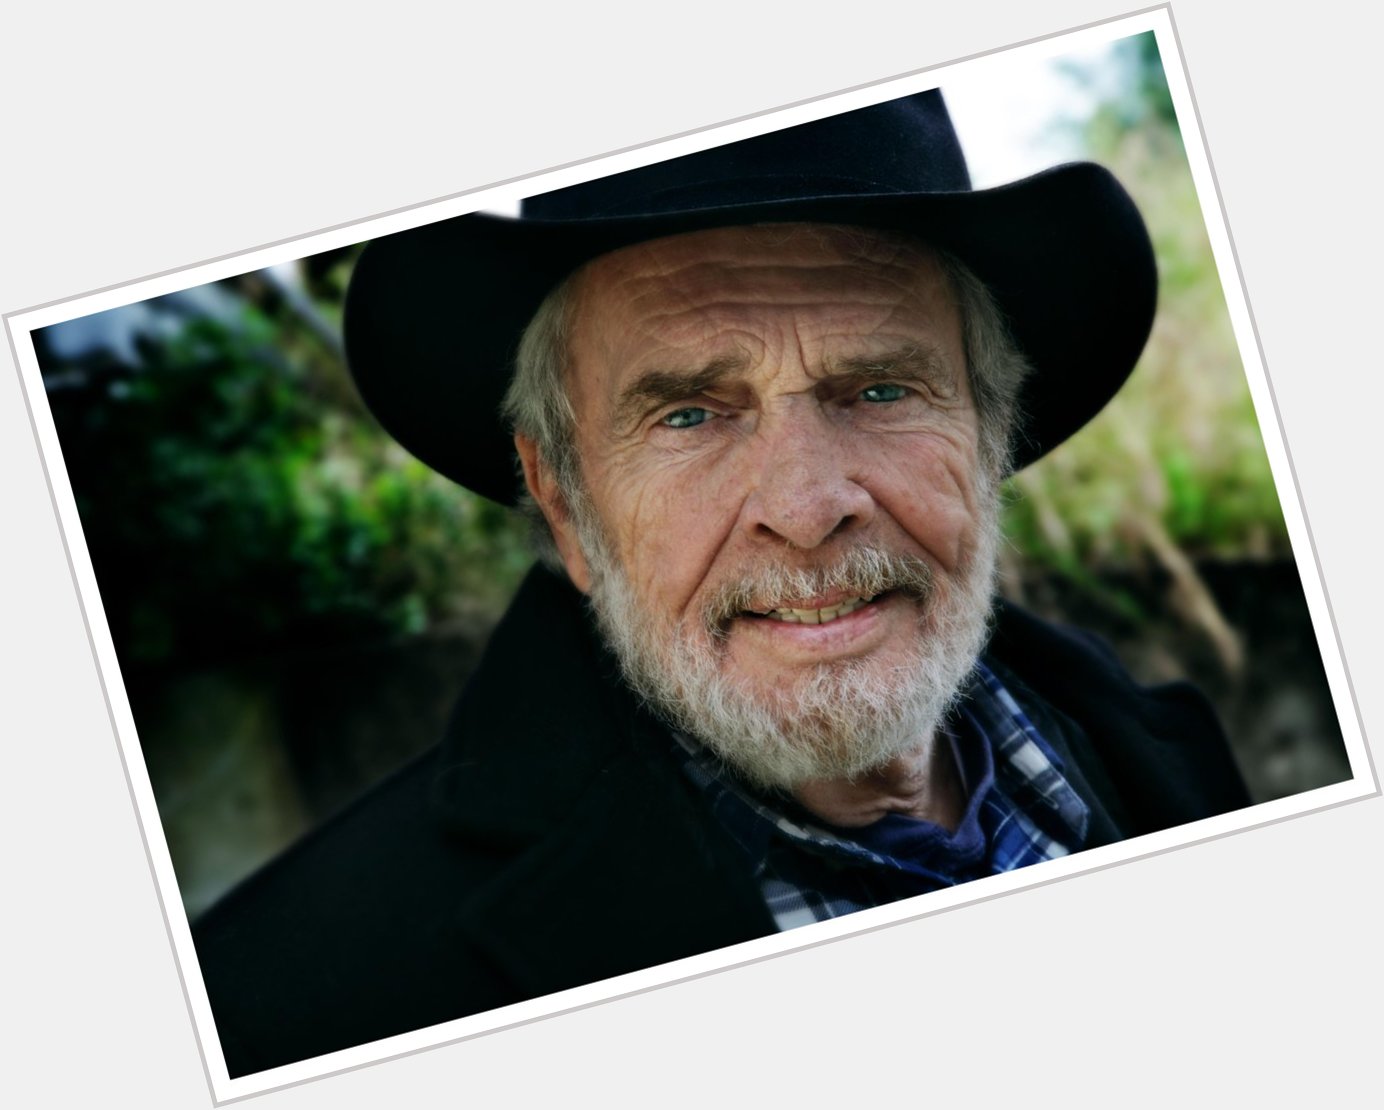     Happy birthday to a legend ~ Merle Haggard is 77 today :-) 